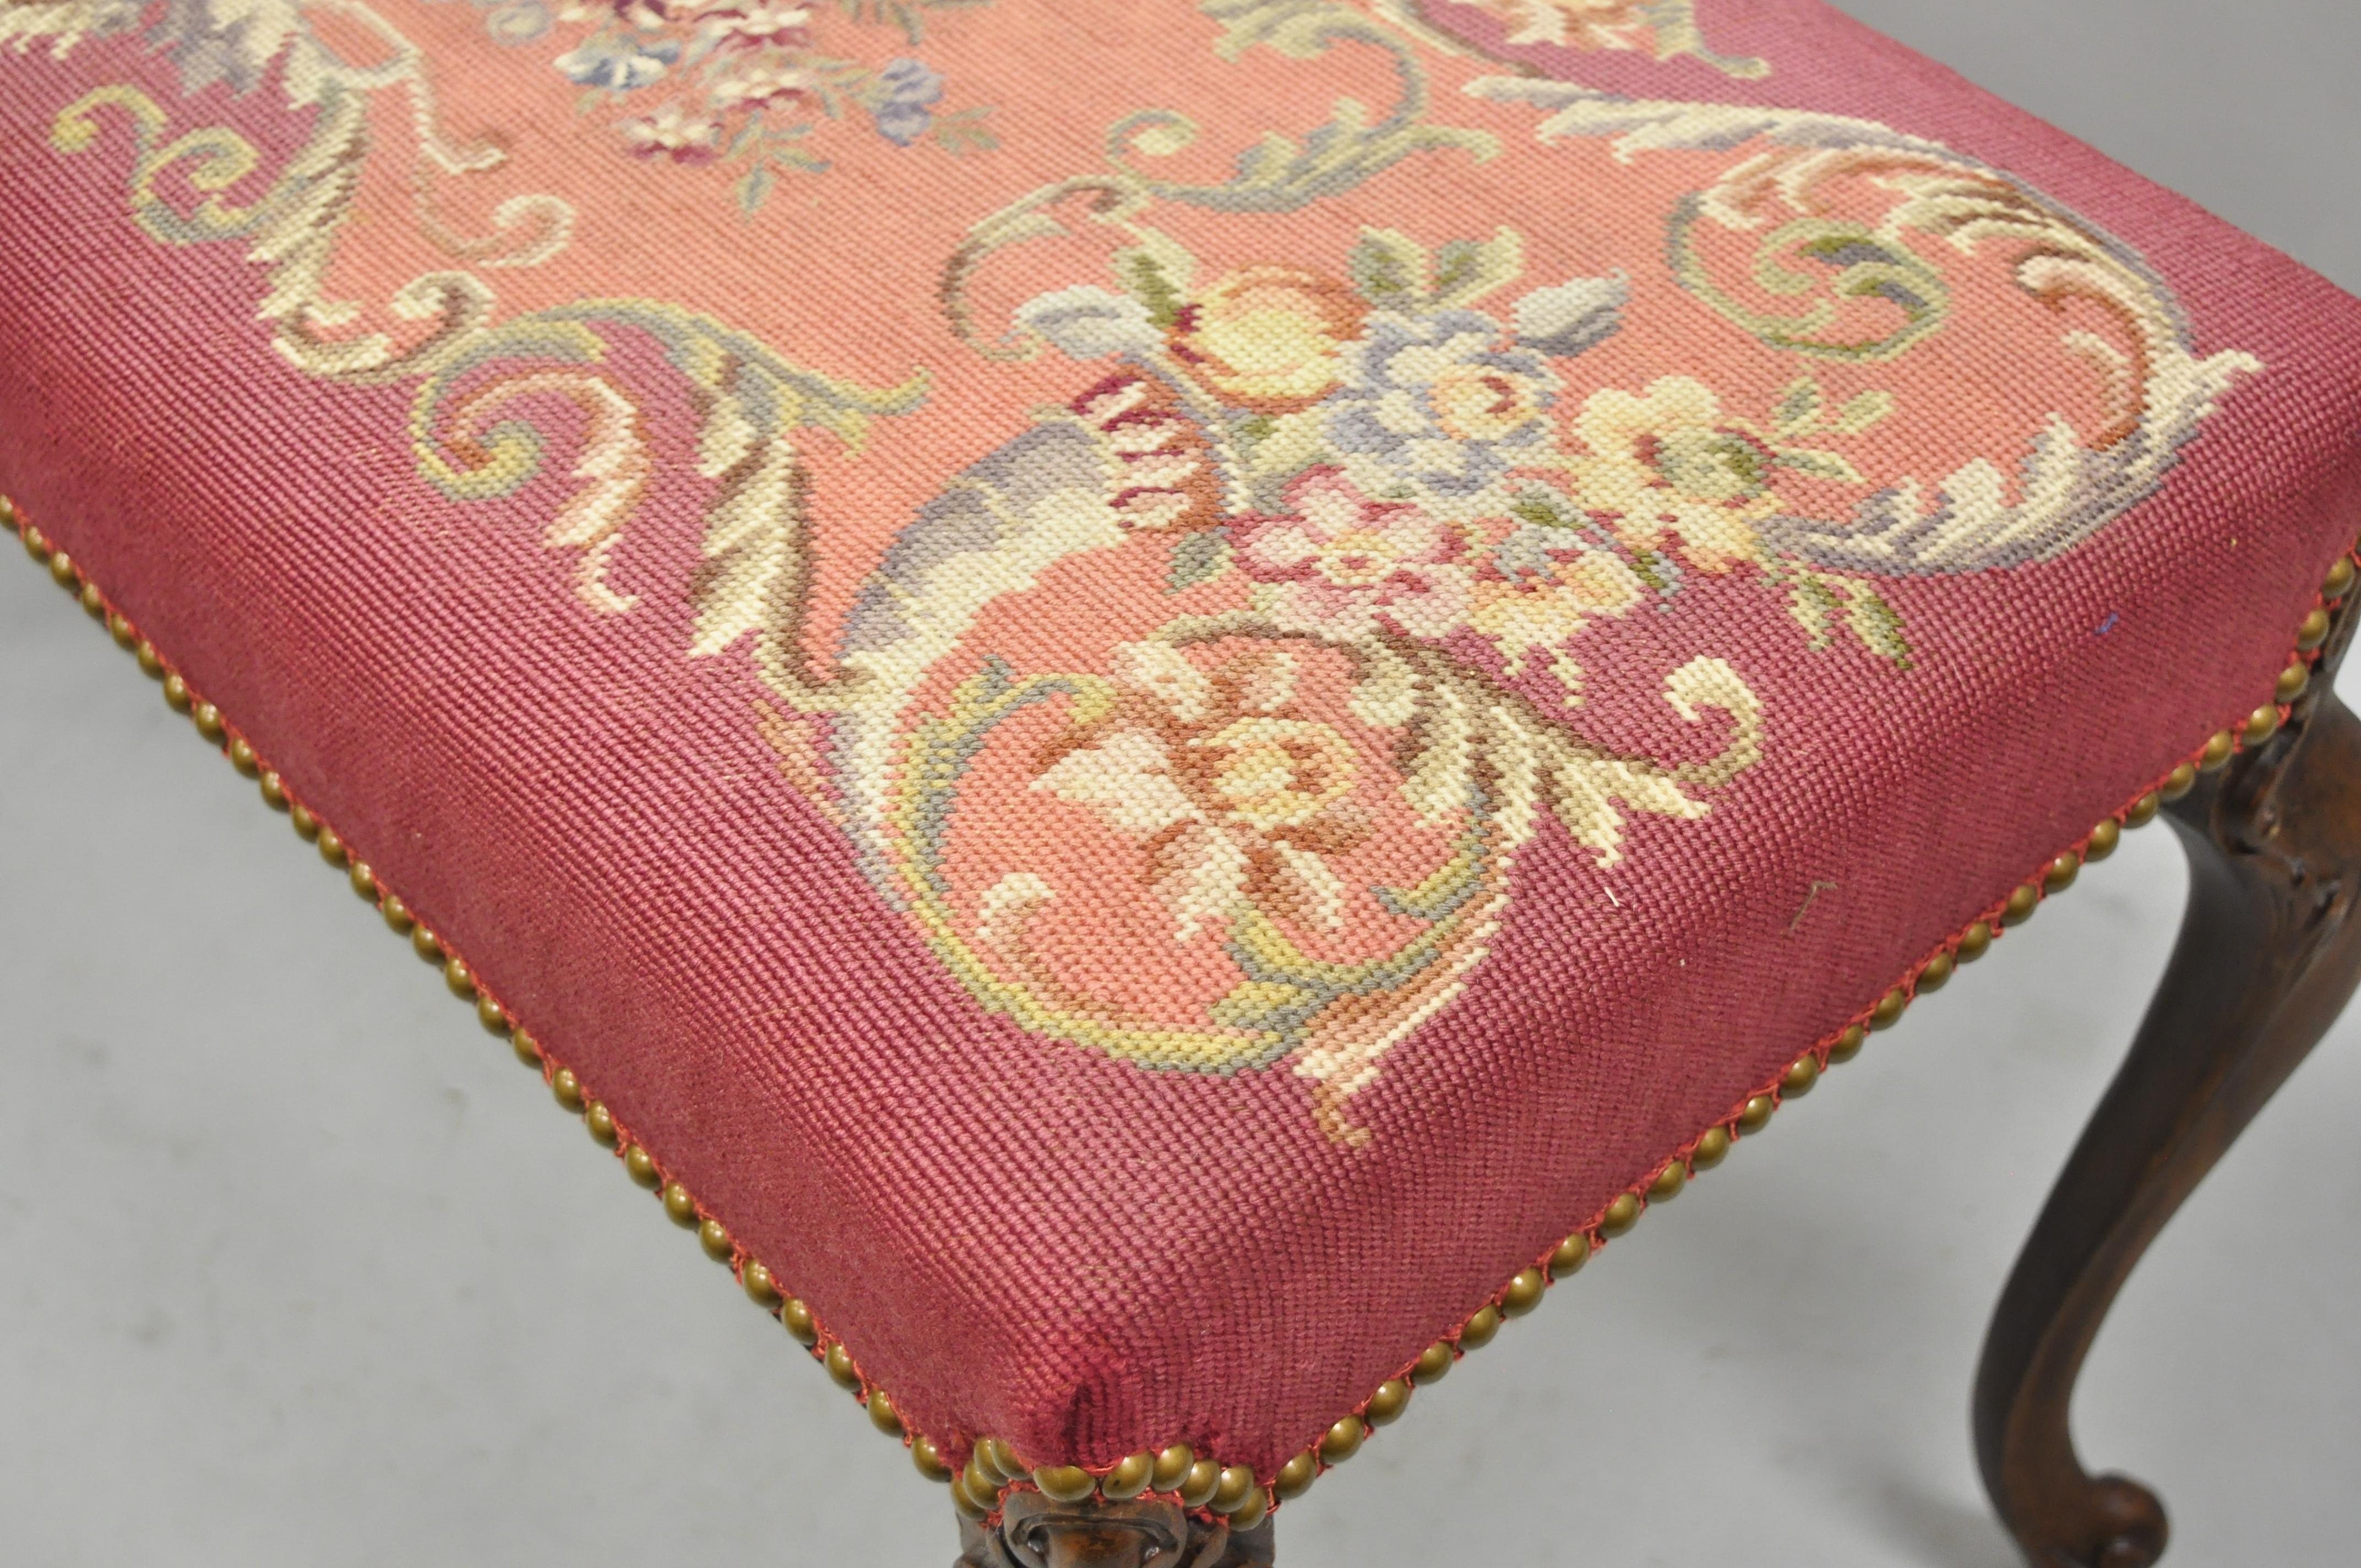 Antique French Victorian Pink Floral Needlepoint Mahogany Cabriole Leg Bench 1